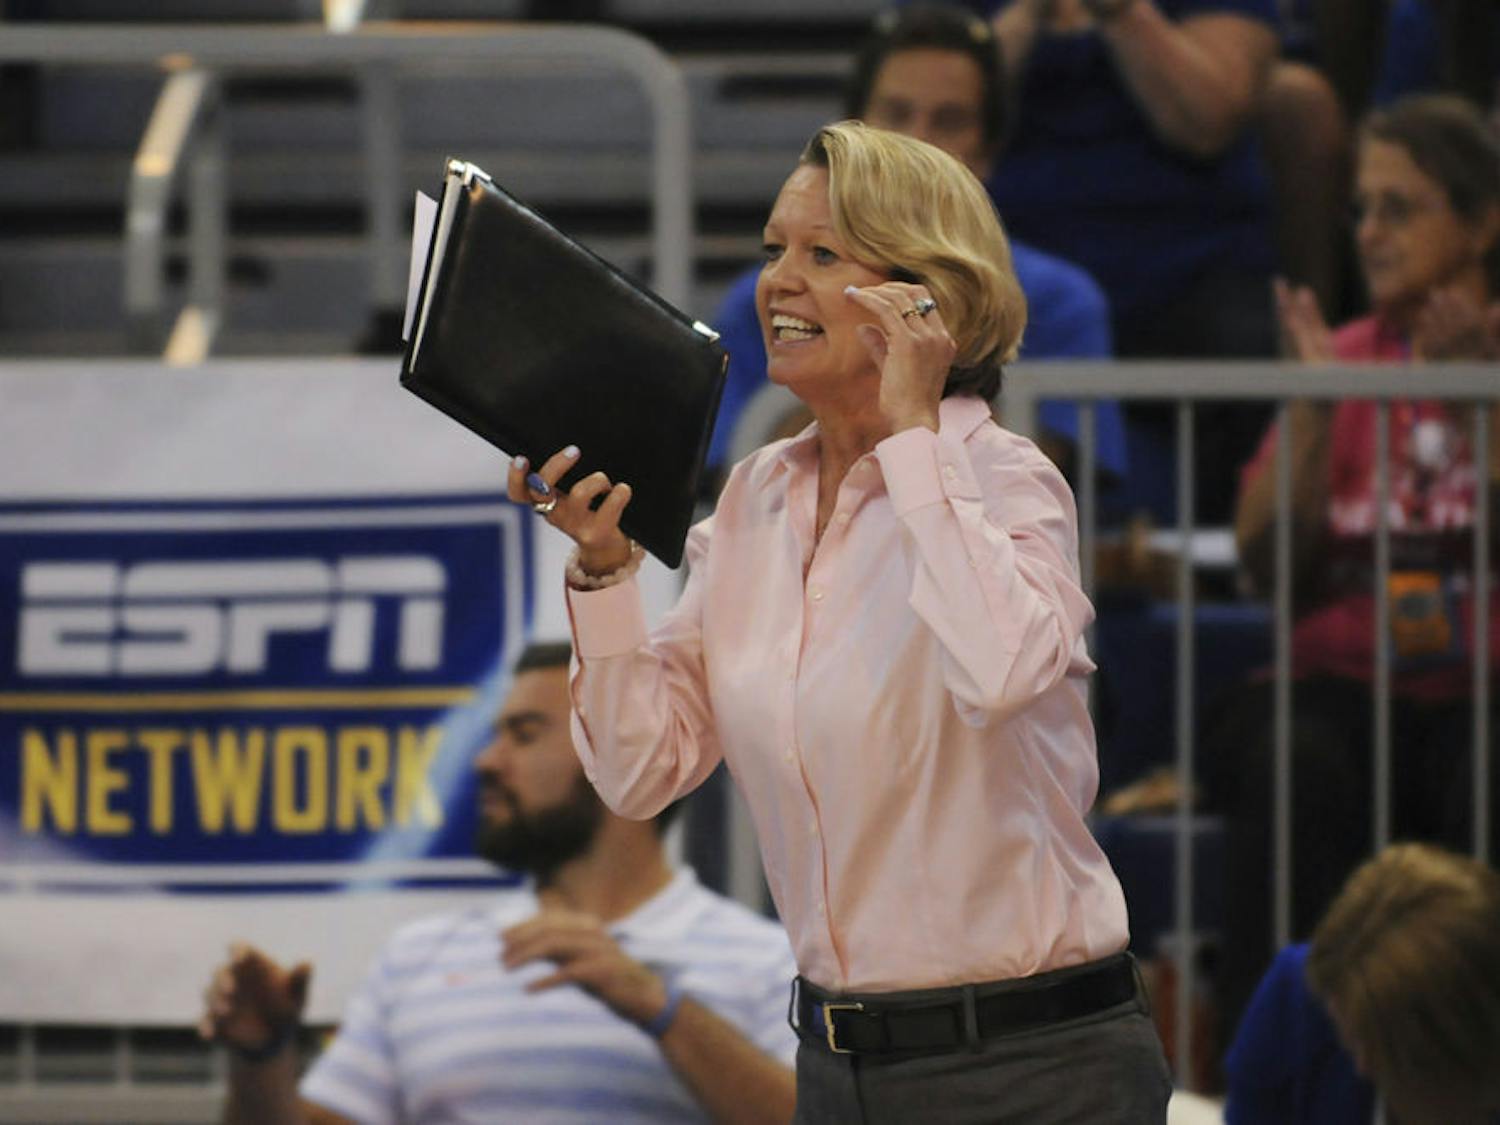 UF coach Mary Wise calls out instructions during Florida's 3-0 win against Auburn on Oct. 11, 2015, in the O'Connell Center. On Friday, Wise earned her 800th win as the coach of the Gators.